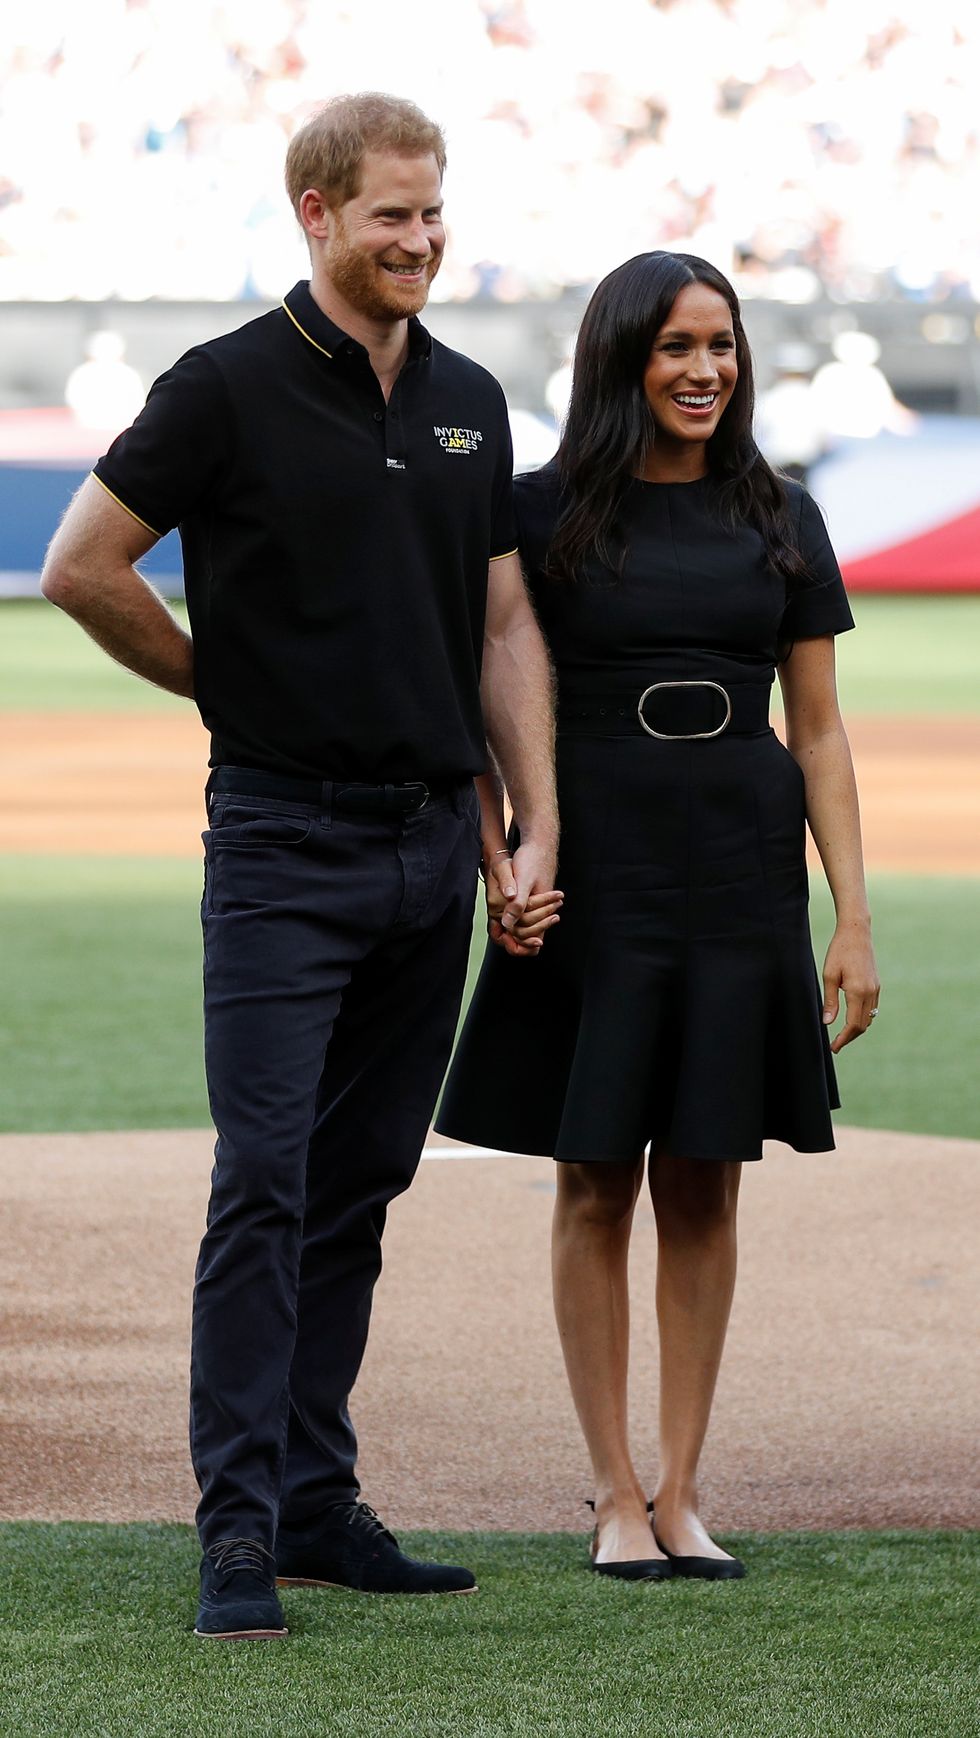 Duke and Duchess of Sussex attend a baseball game in London